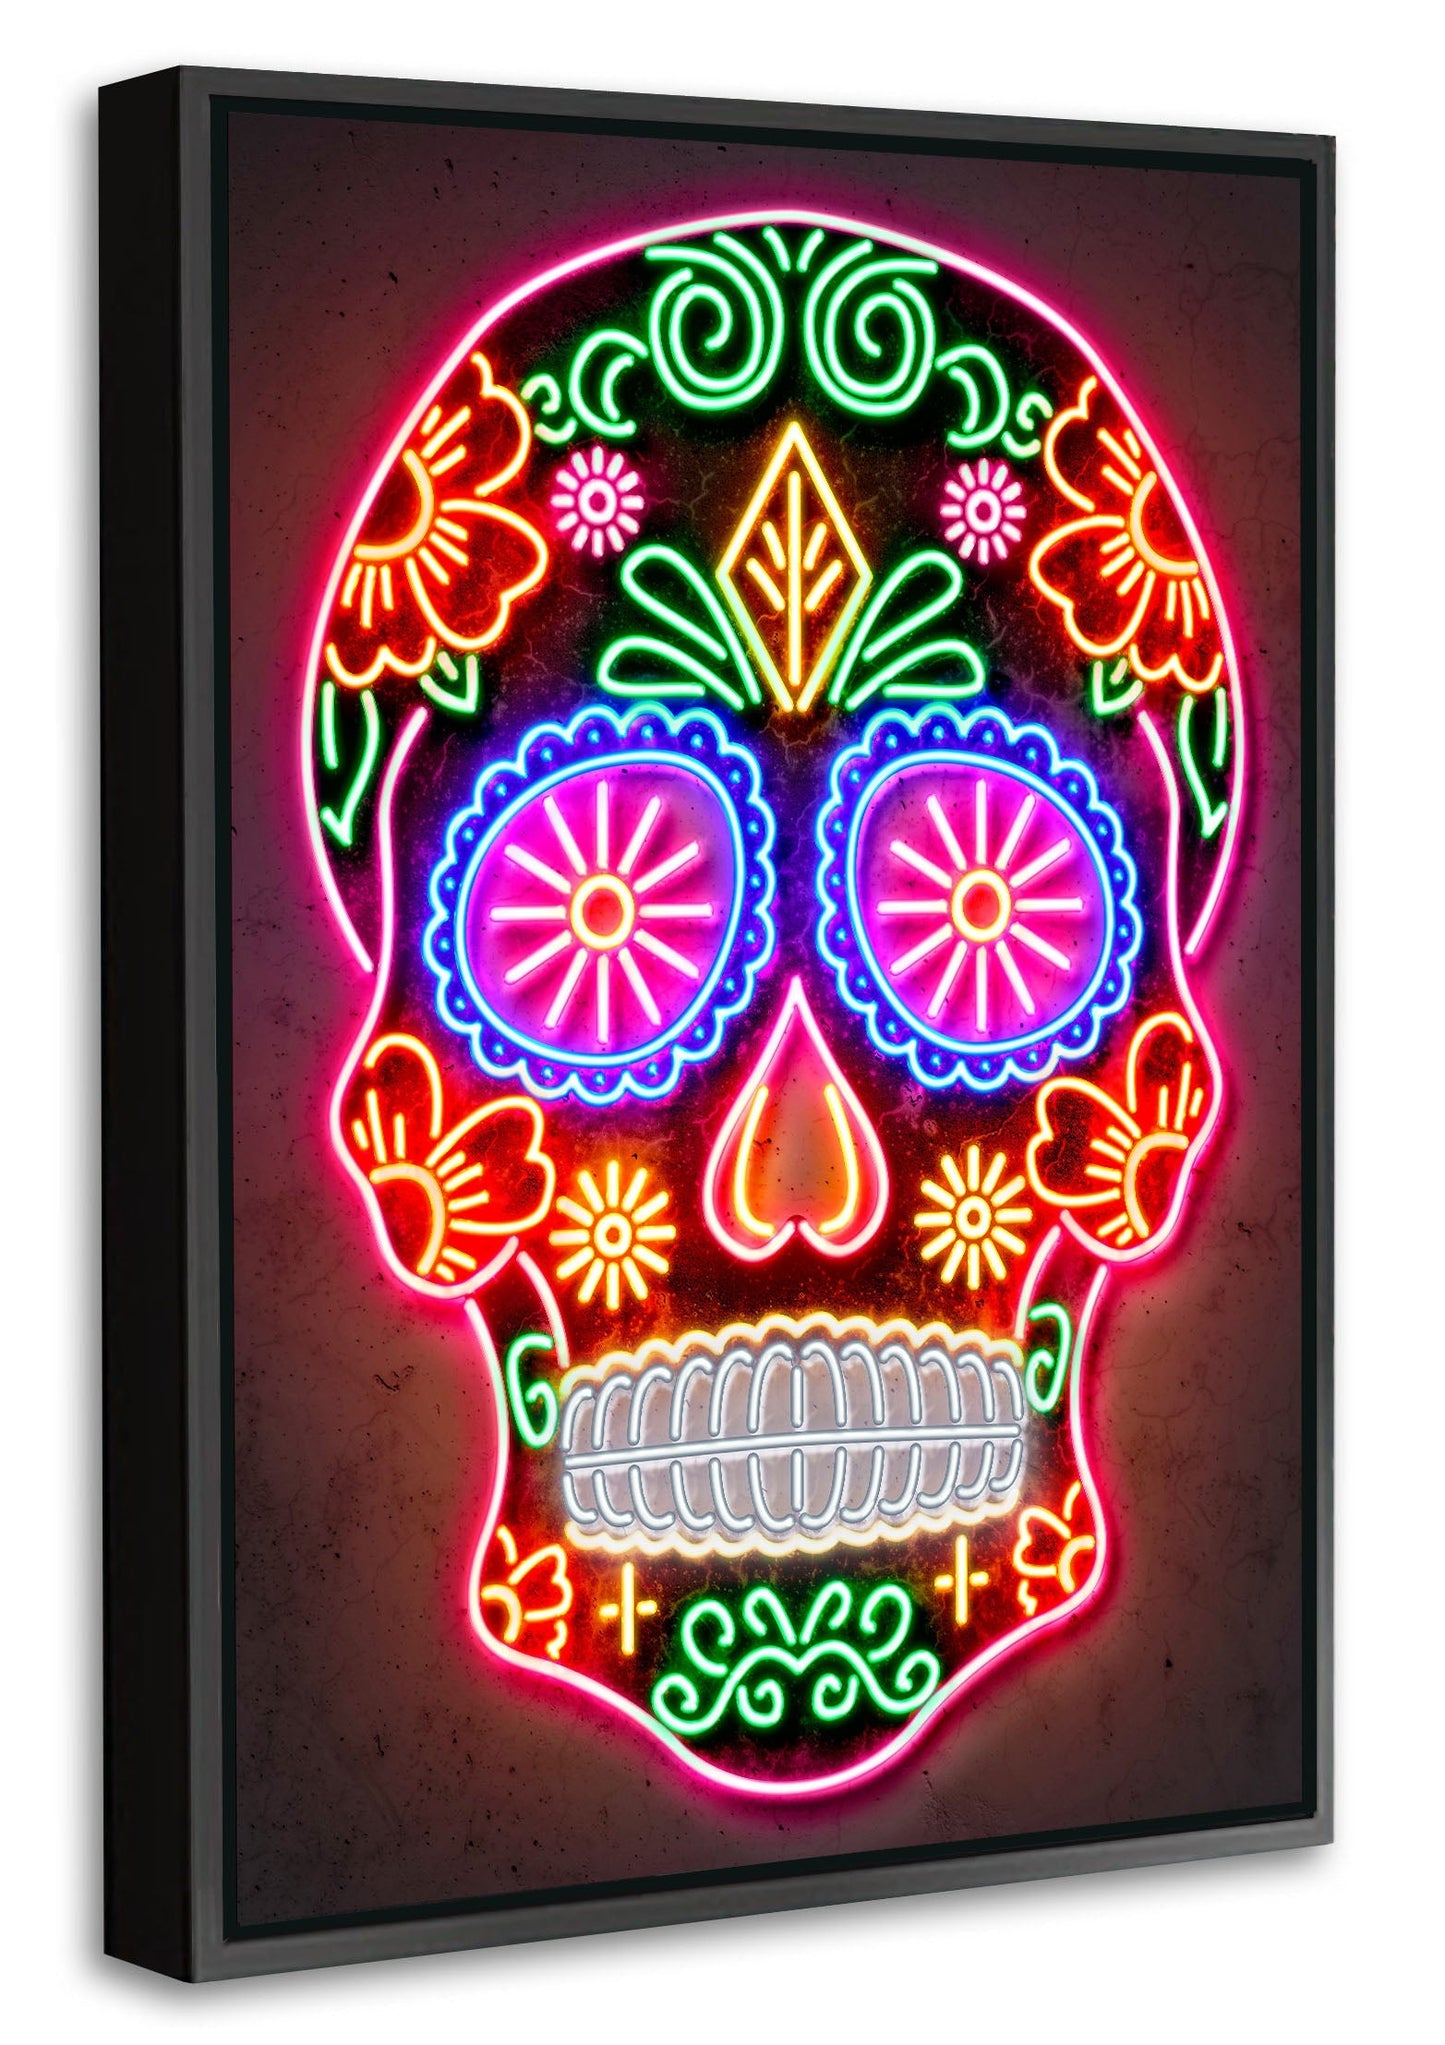 Day of the Dead-alt, neon-art, print-Canvas Print with Box Frame-40 x 60 cm-BLUE SHAKER